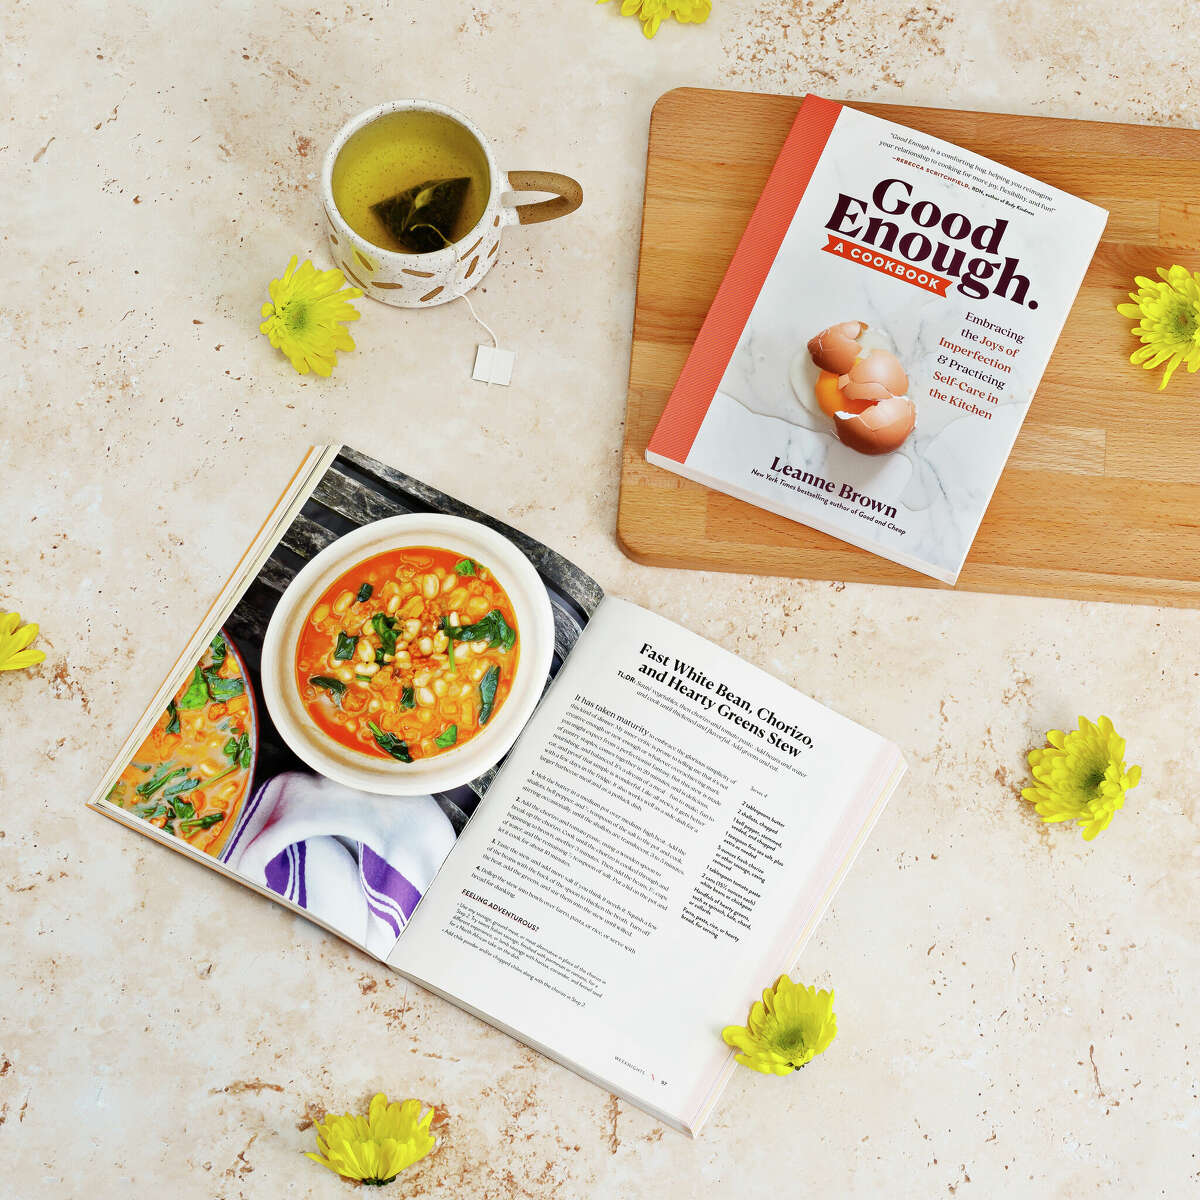 Author Leanne Brown joins Extra Spicy podcast host and critic Soleil Ho to discuss her latest cookbook, "Good Enough." 